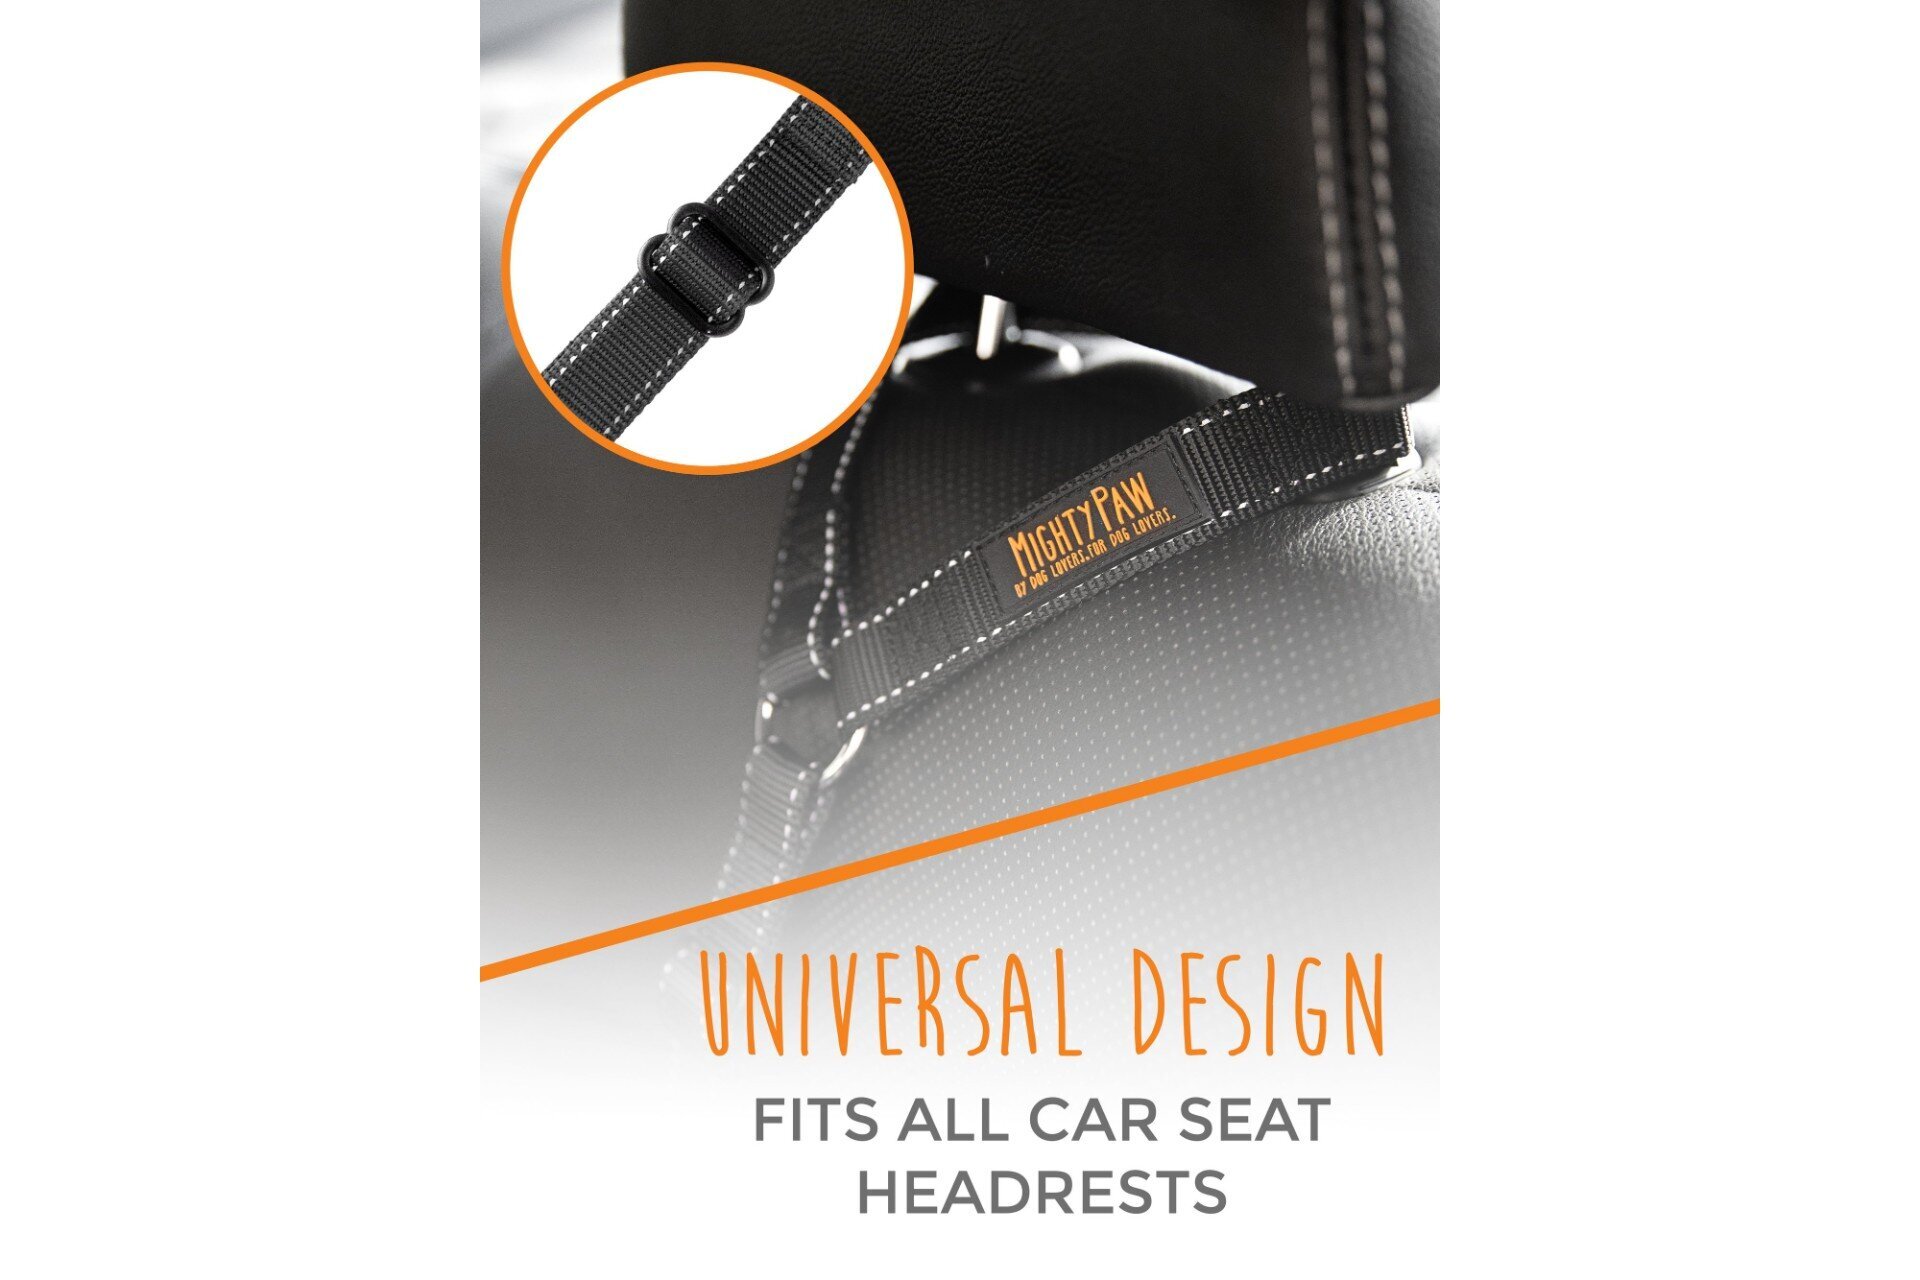 Universal Design Easily Attaches to Any Car Head Rest.Adjustable Length for Small & Large Dogs.Lockable Swivel Rock Climbers Carabiner. TEAYPET Dog Car Headrest Seat Belt 